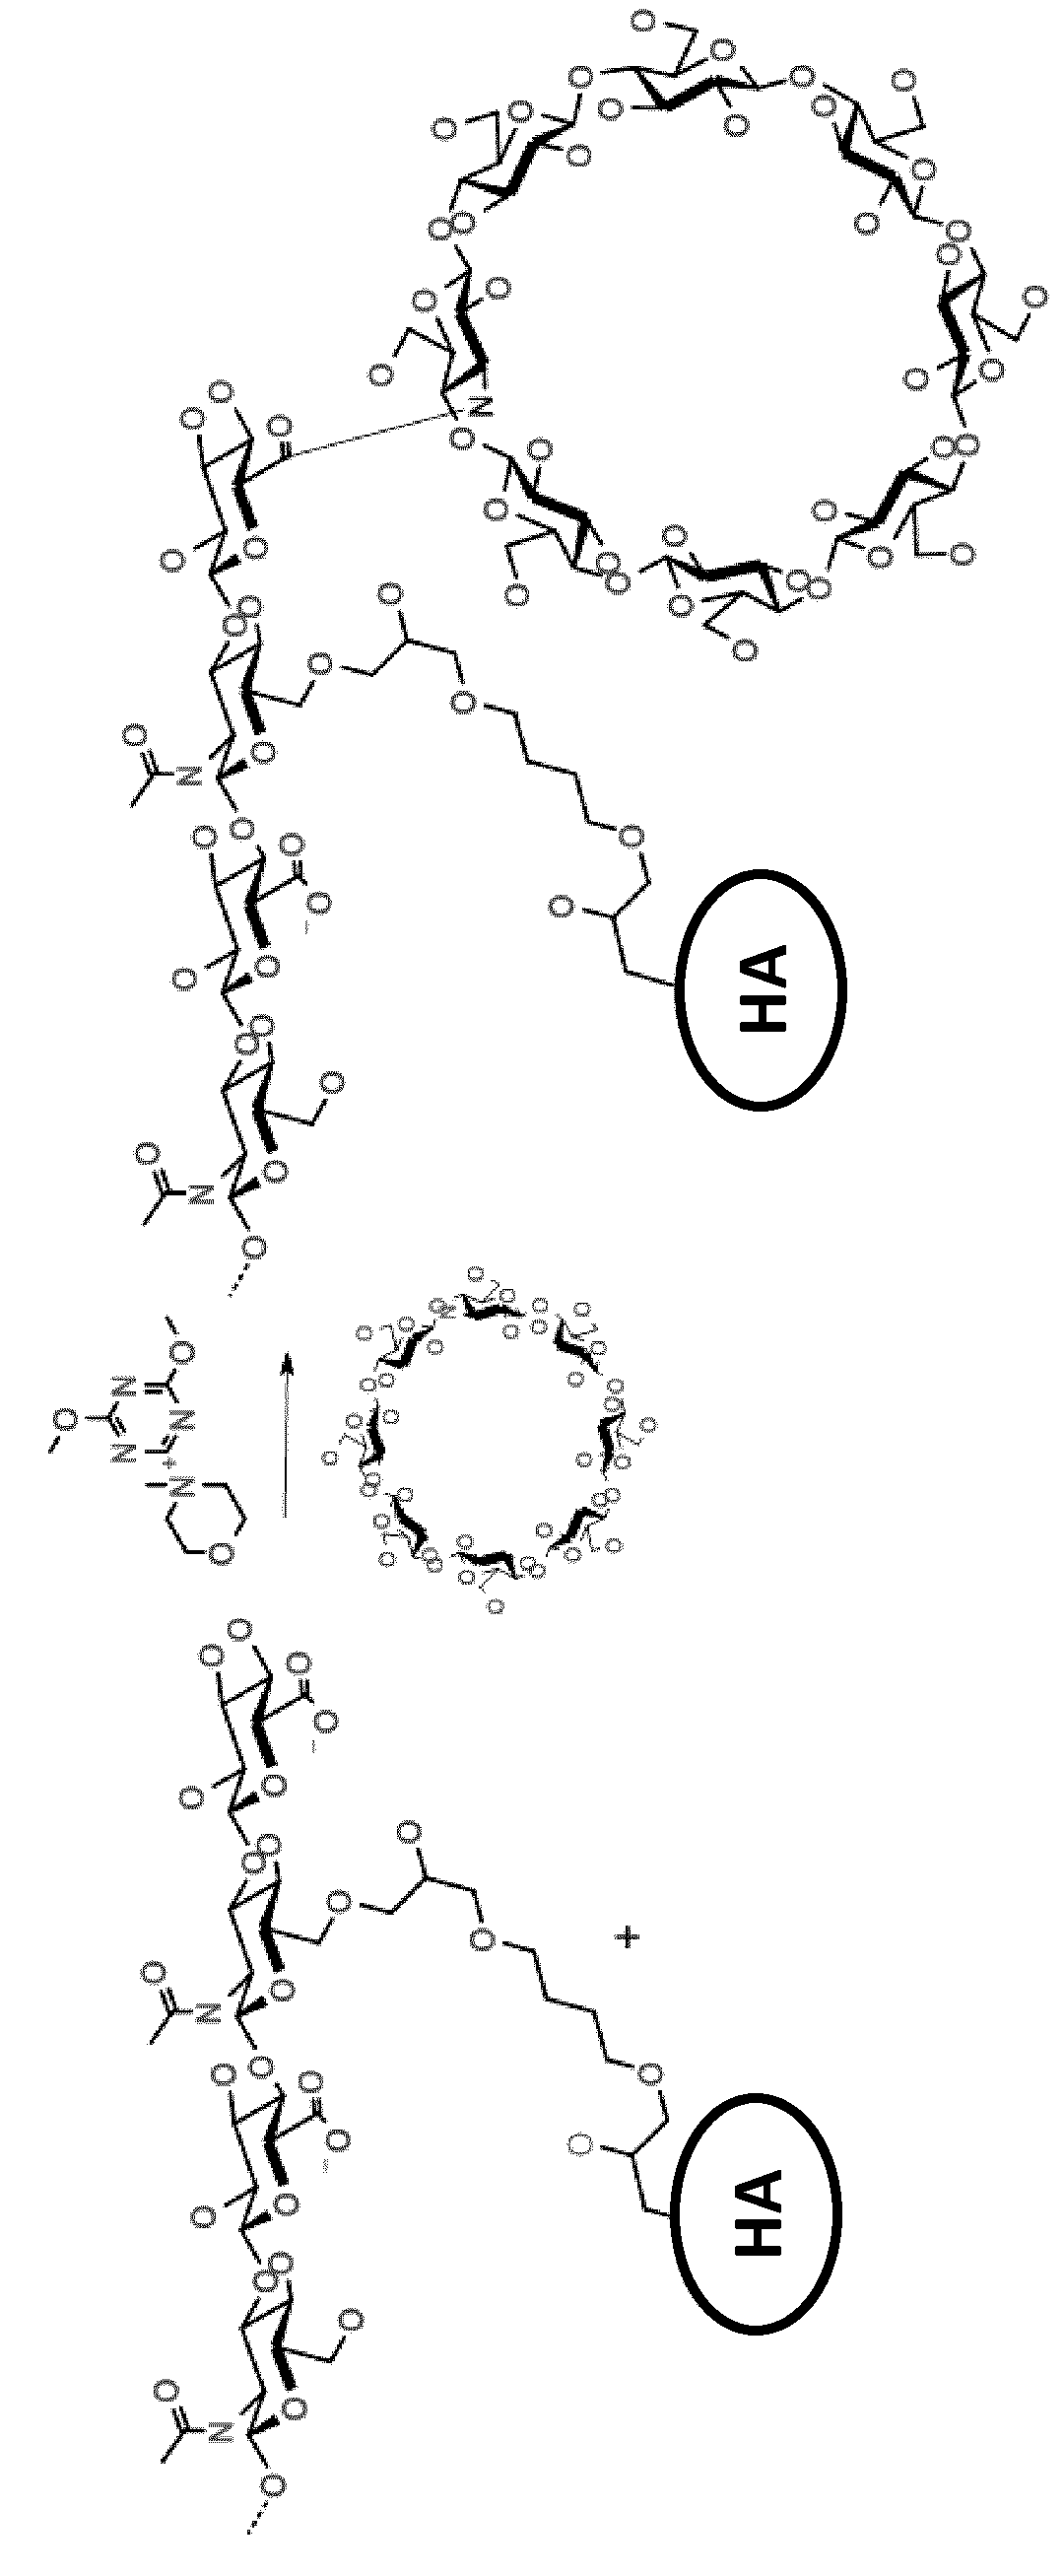 Grafting of cyclodextrin by amide bonds to an ether cross-linked hyaluronic acid and uses thereof